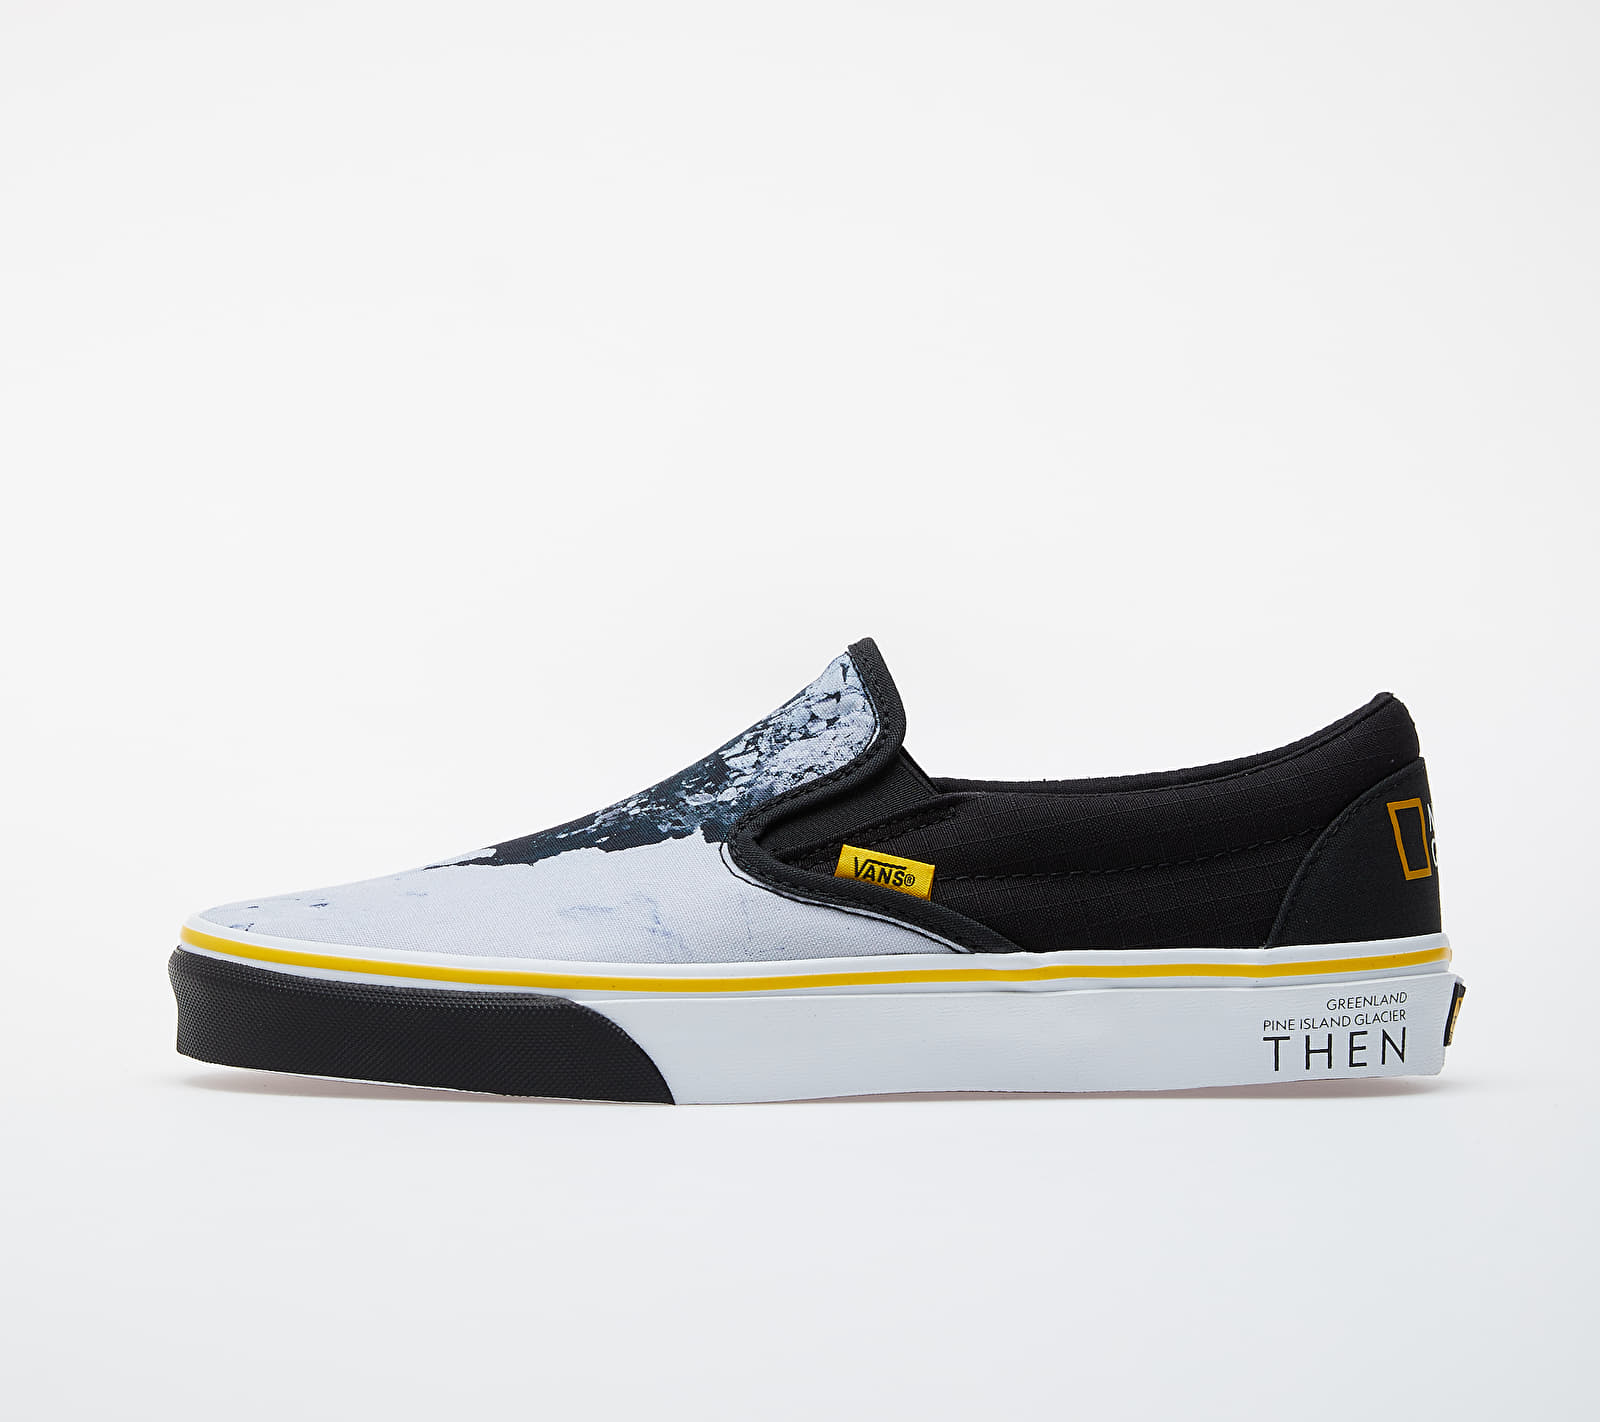 Vans Classic Slip-On (National Geographic) Black/ White-Yellow VN0A4U38WT31